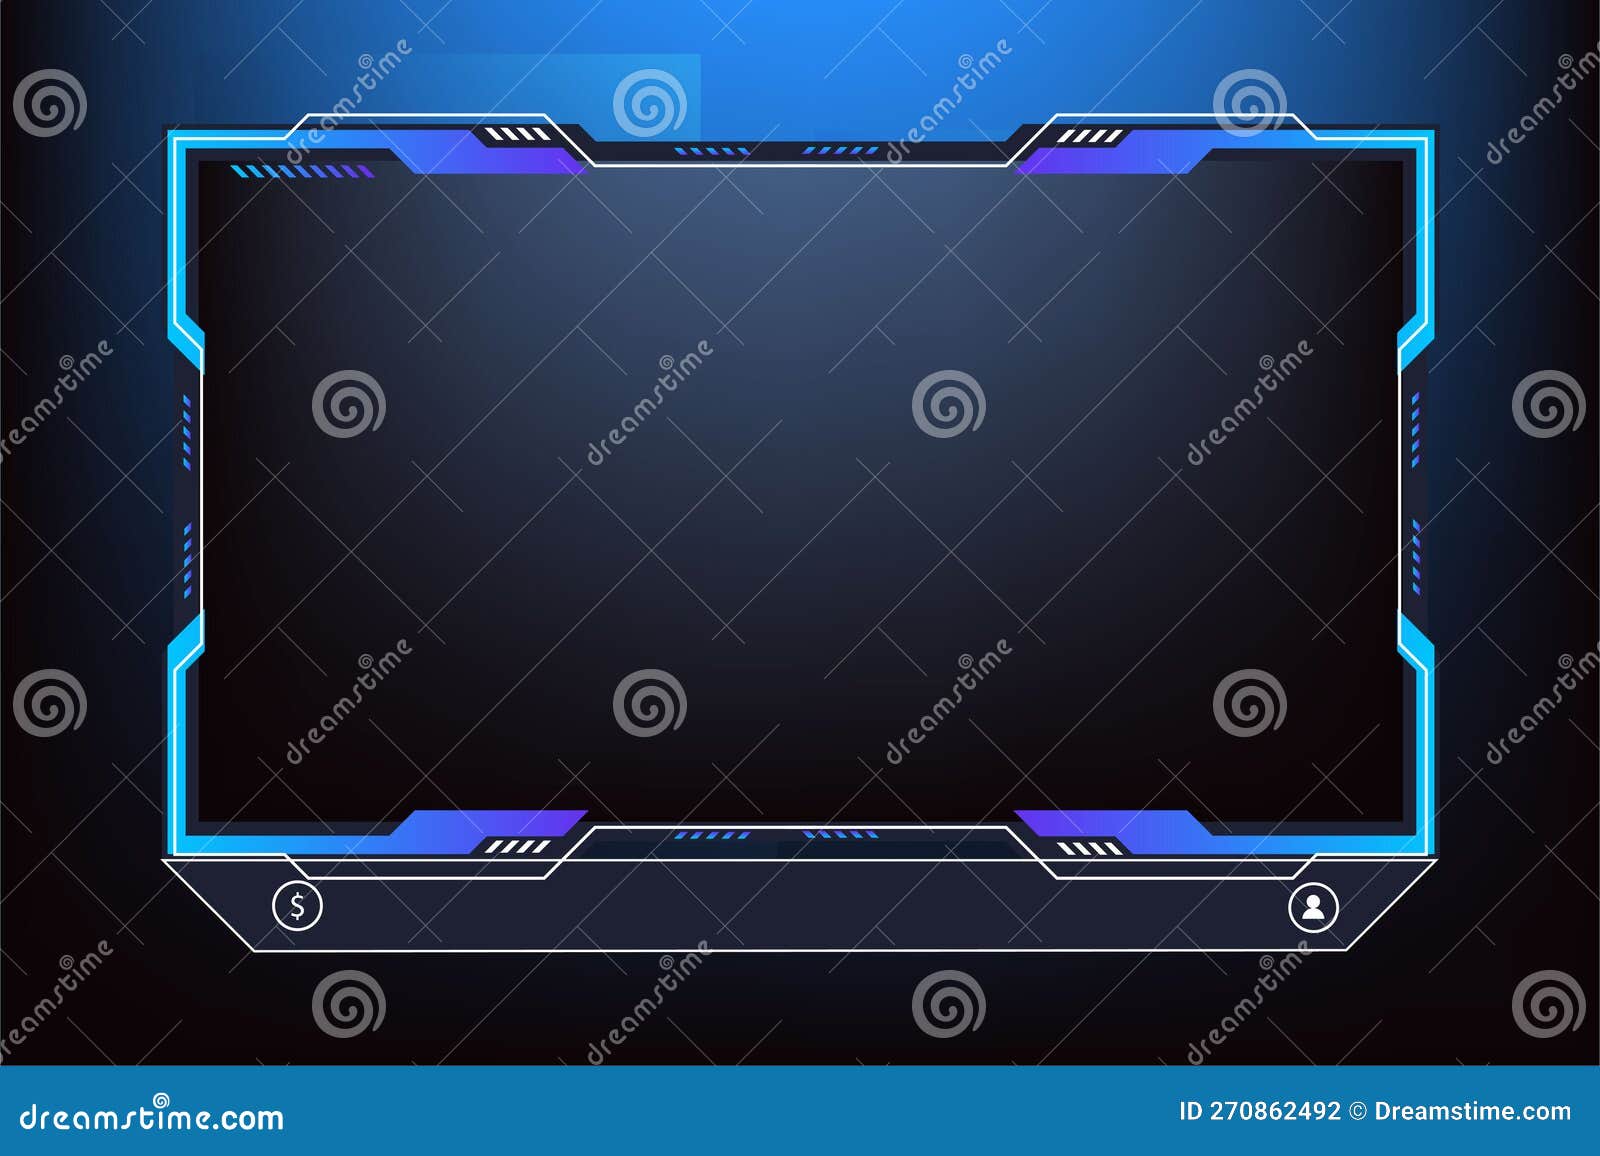 Creative Streaming Overlay Design for Online Gamers with Blue Colors